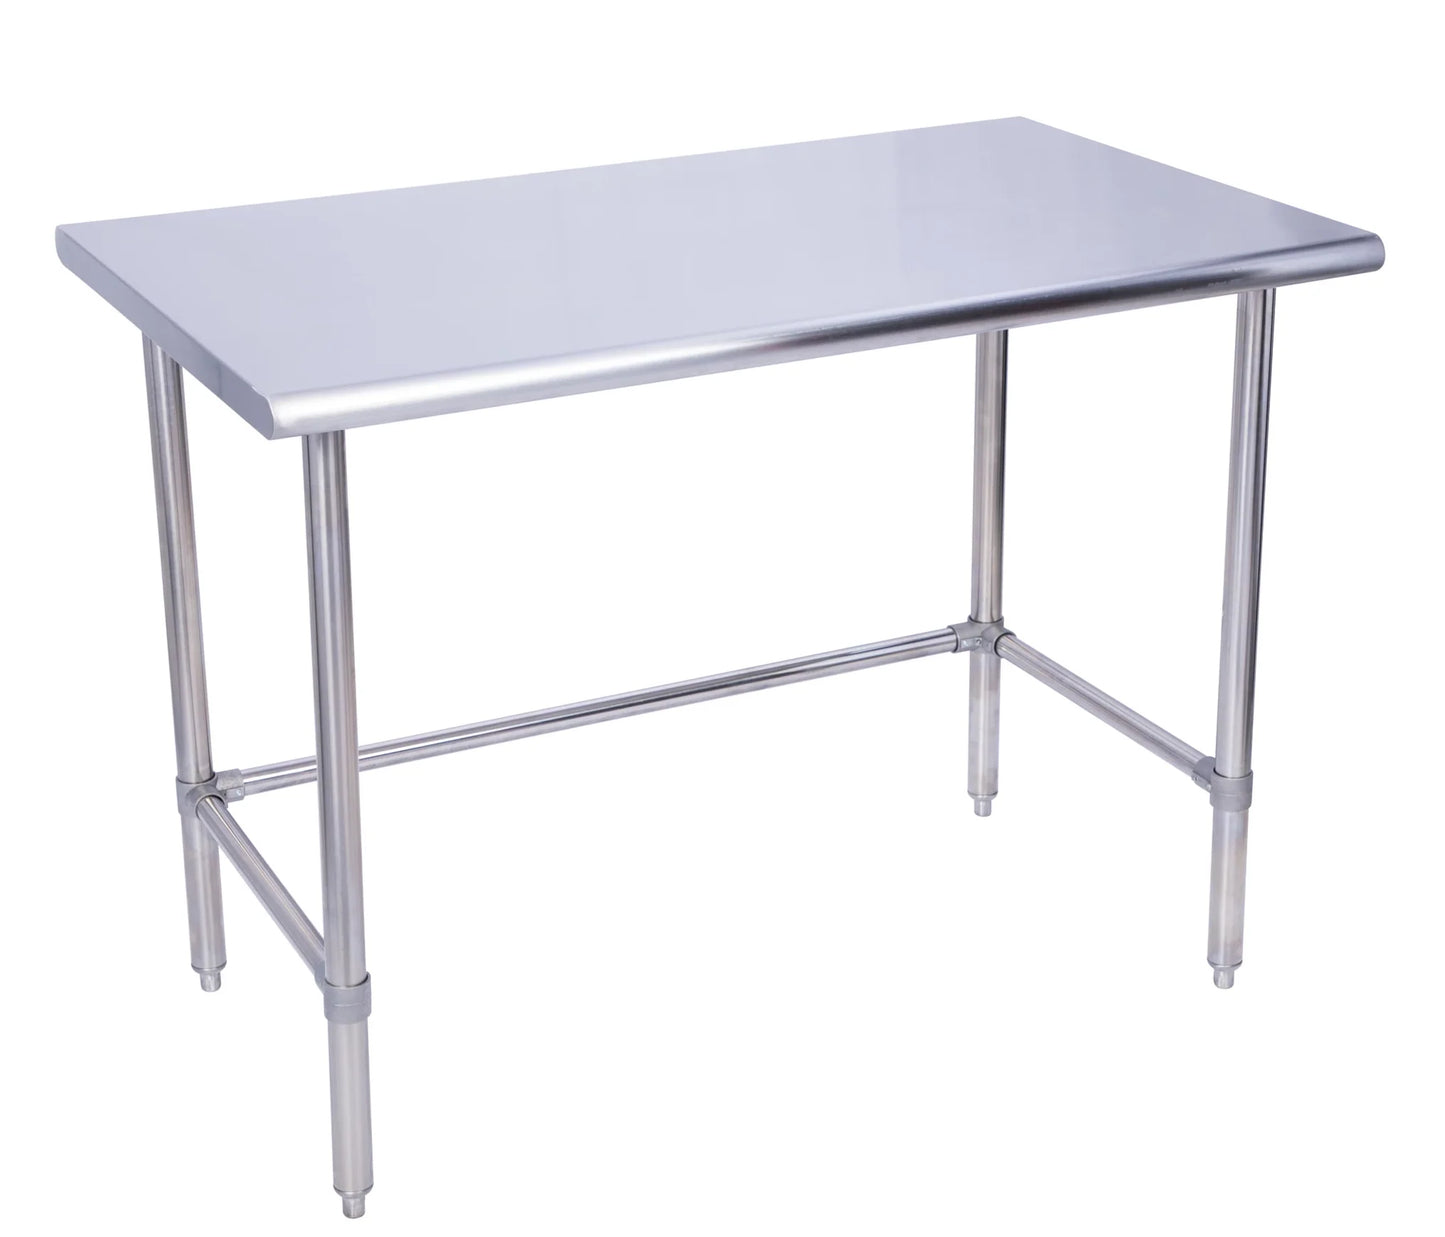 KCS WSCB-3648 36" x 48" Stainless Steel Work Table With Cross Bar